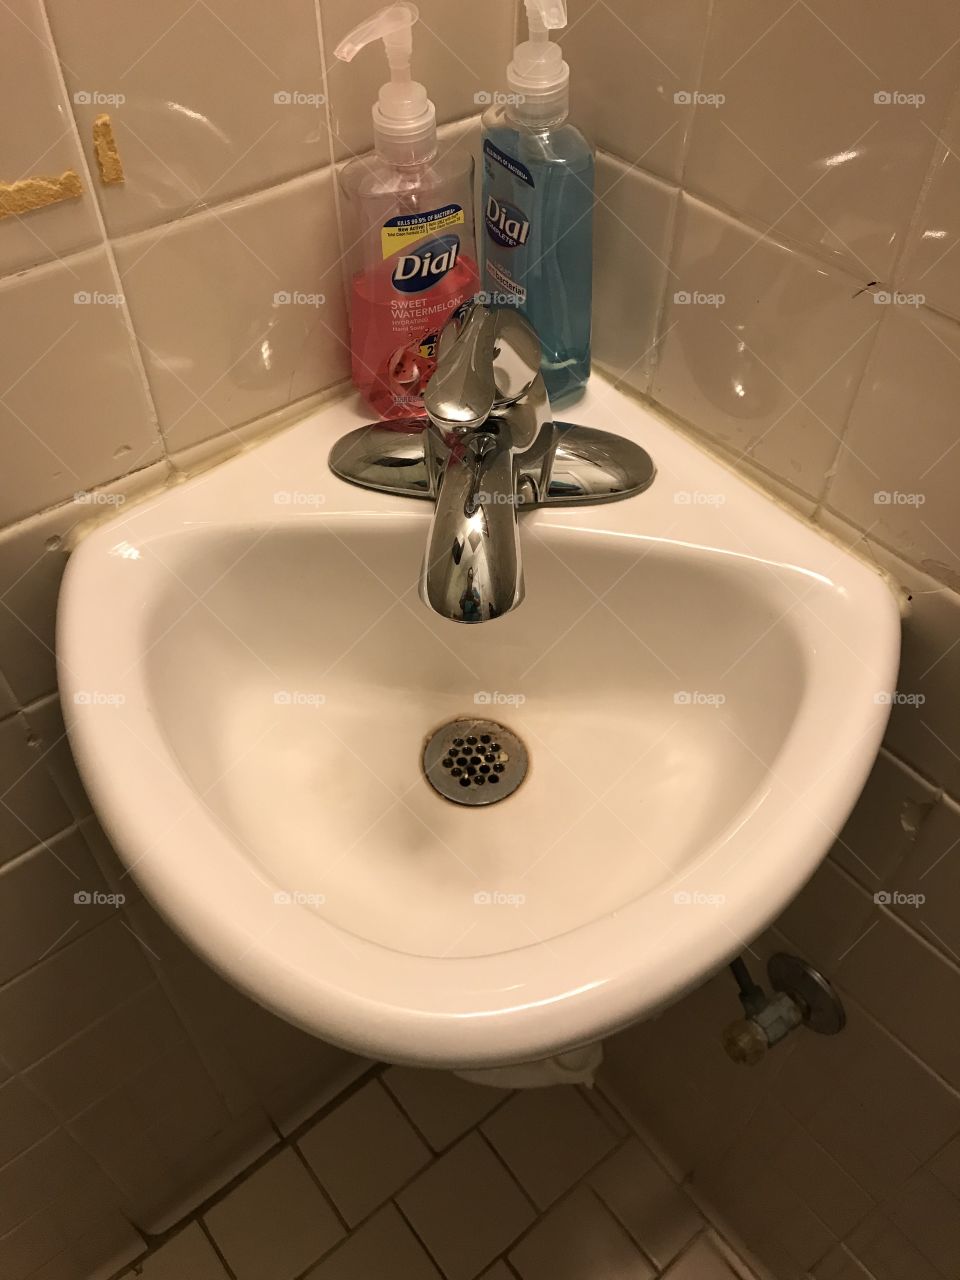 Tiny sink at the doctor’s office